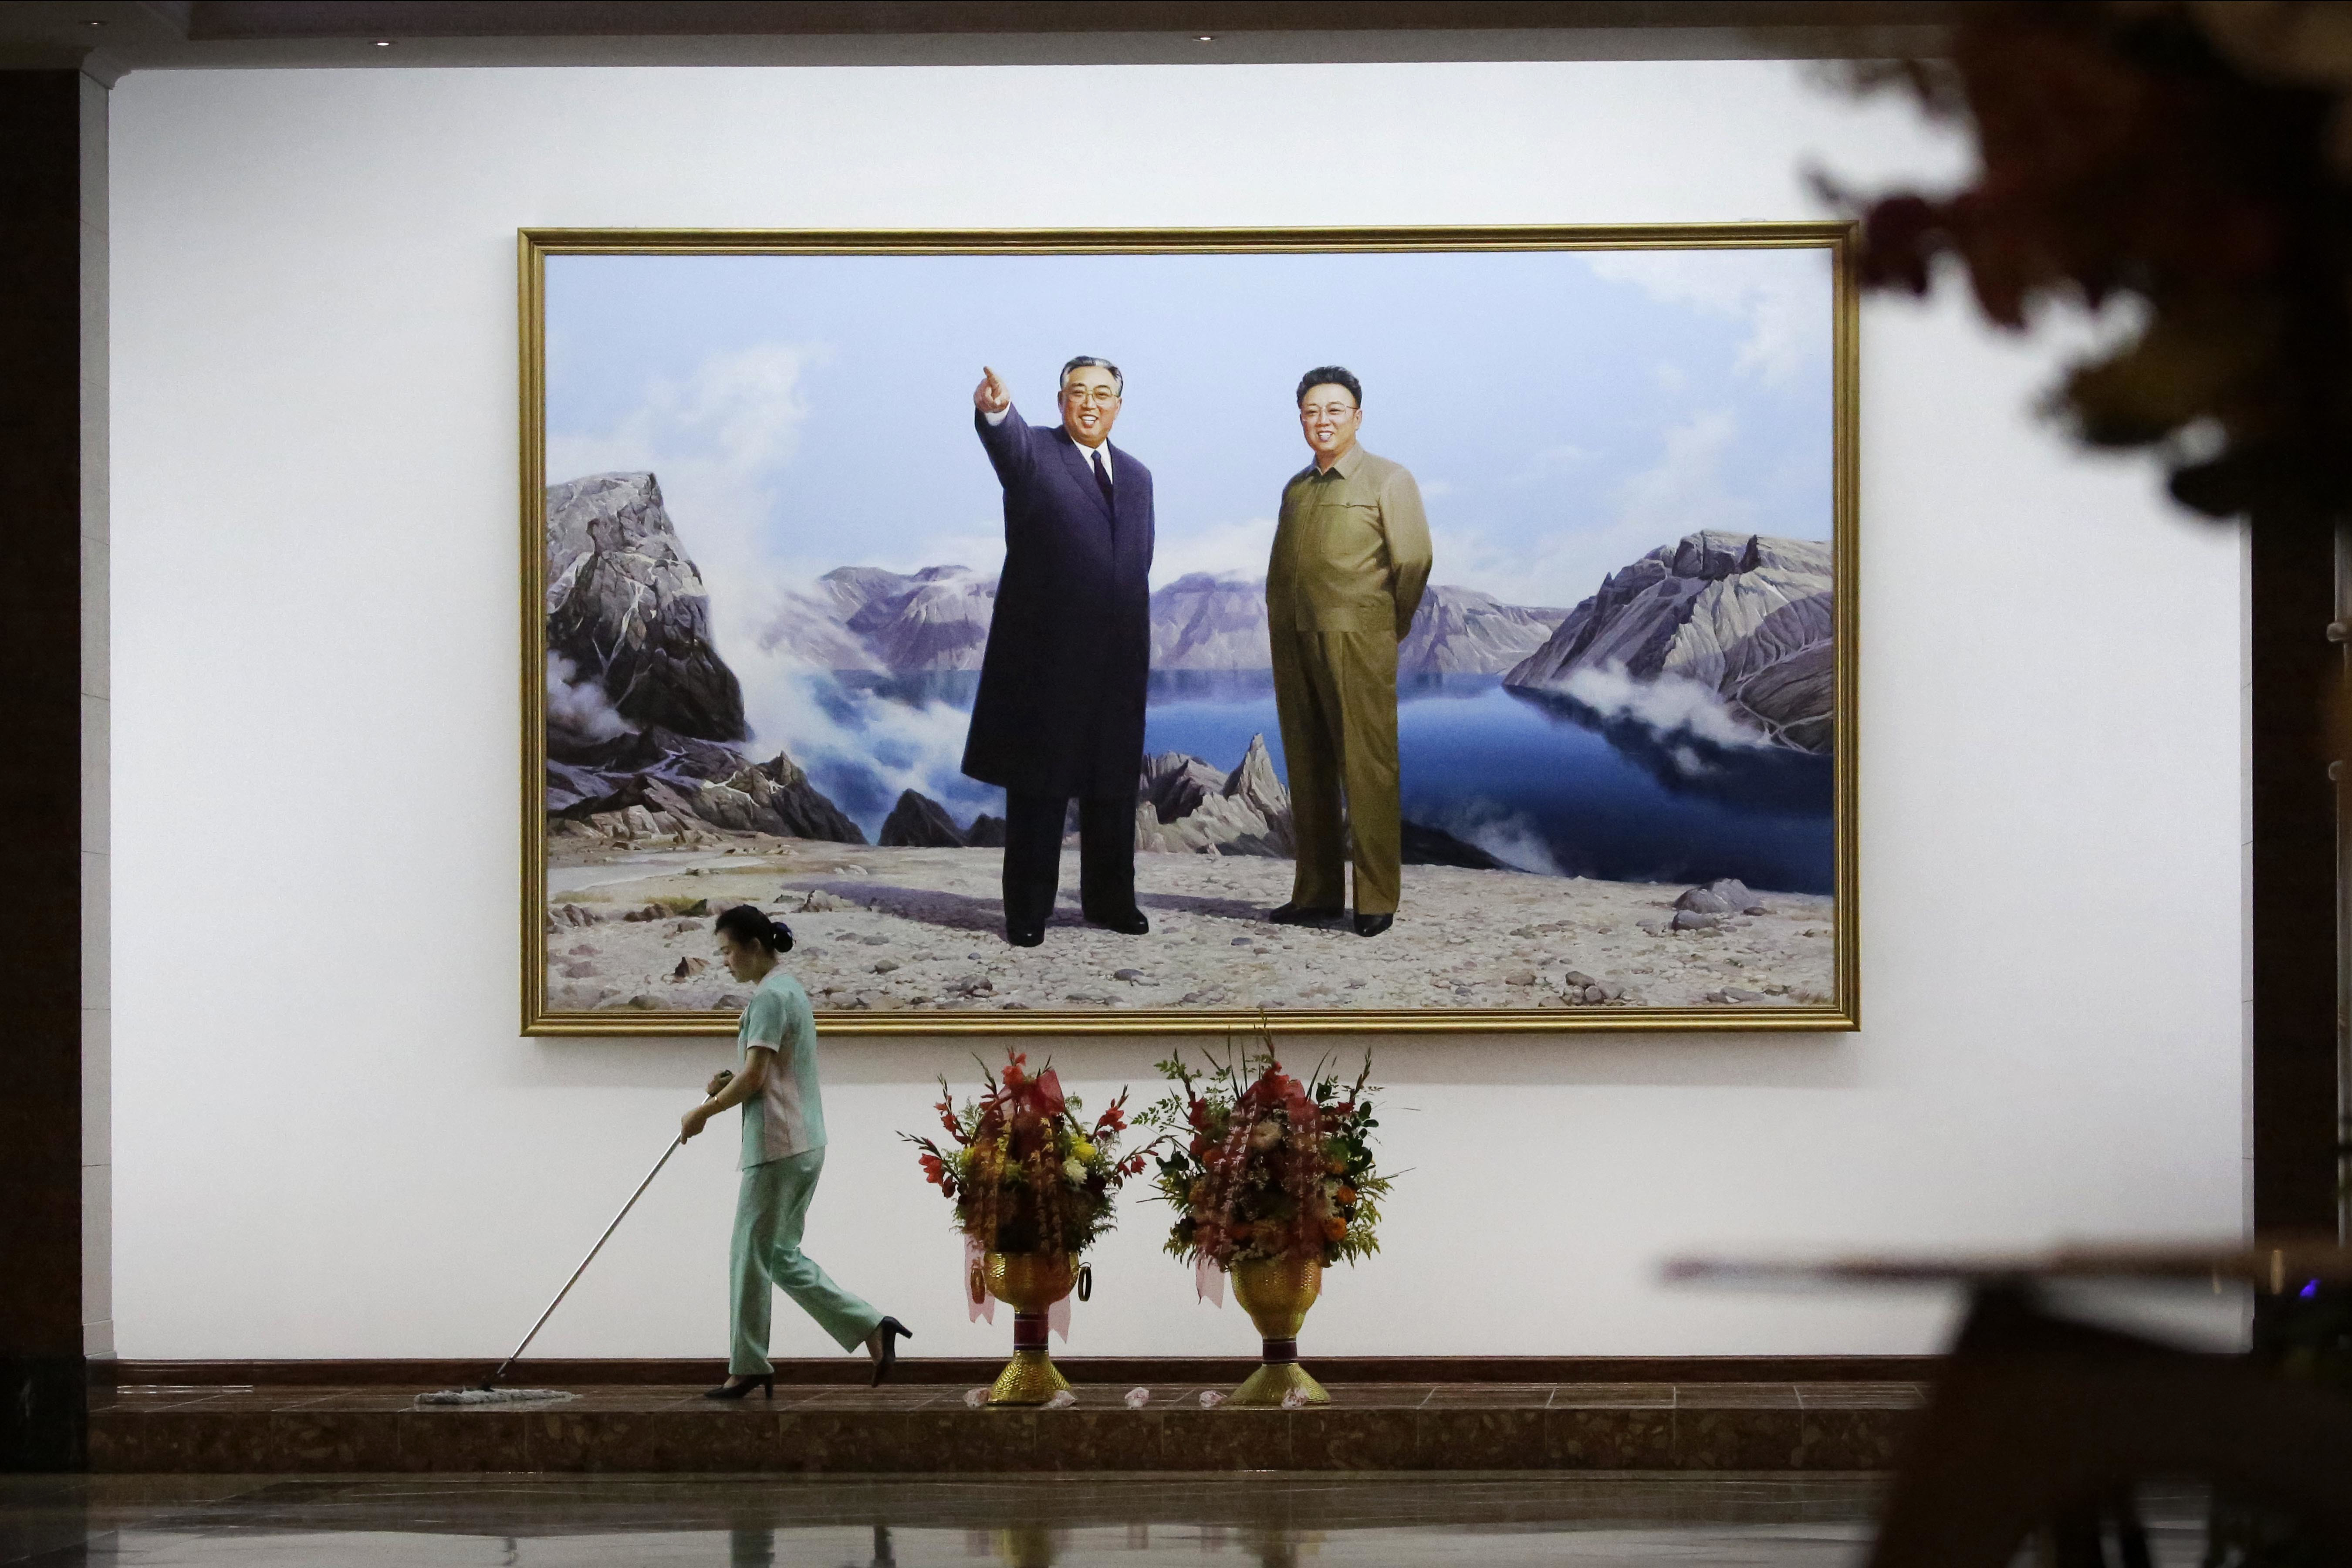 A hotel staff member mops the floor where a picture featuring portraits of the late North Korean leaders Kim Il Sung, left, and Kim Jong Il decorates the lobby wall Monday, June 19, 2017, in Pyongyang, North Korea. (AP Photo/Wong Maye-E)